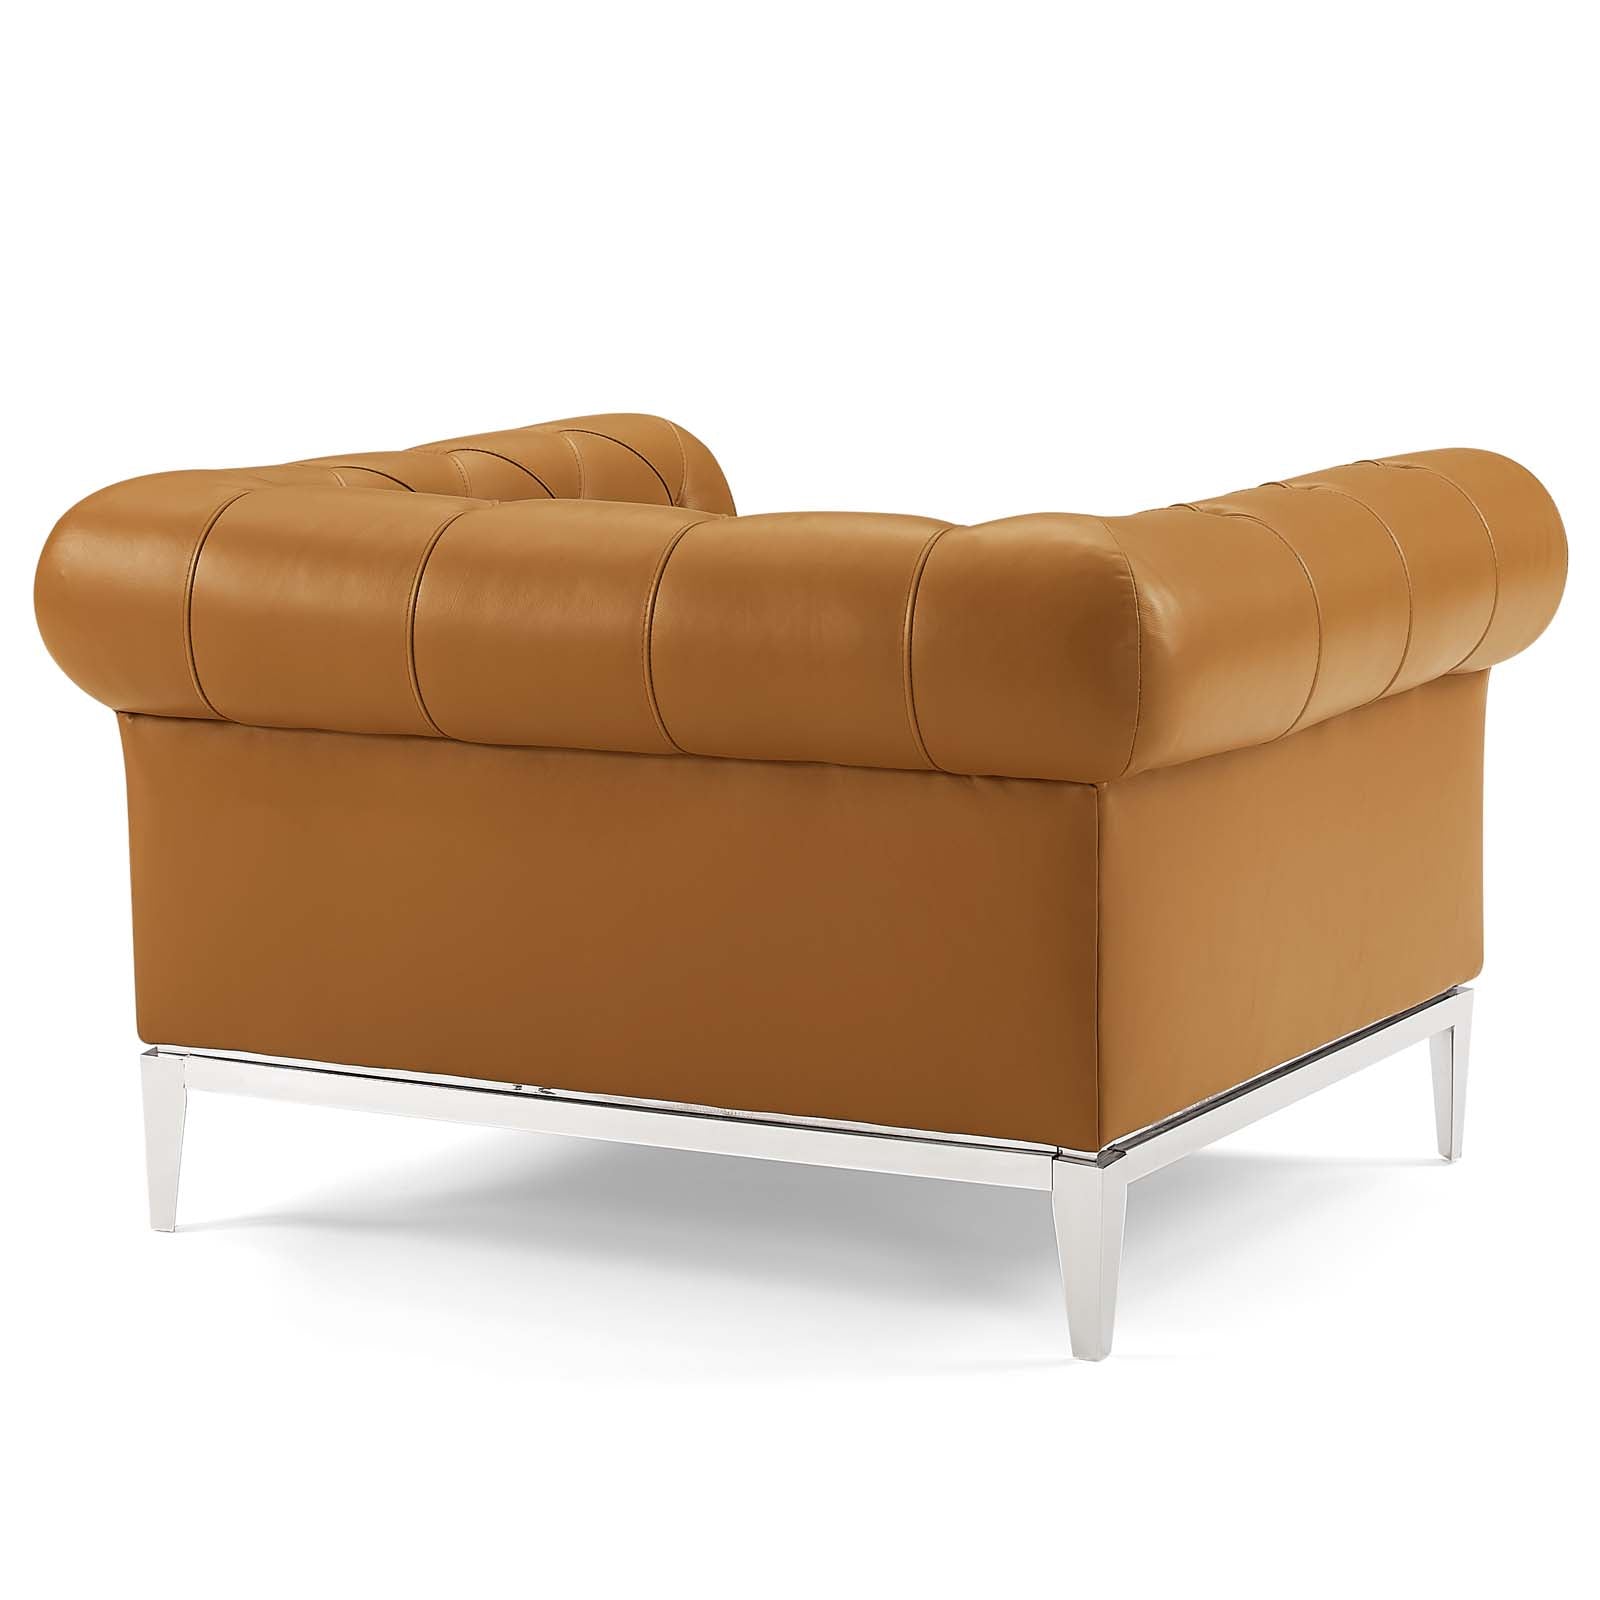 Idyll Tufted Upholstered Leather Loveseat and Armchair - East Shore Modern Home Furnishings